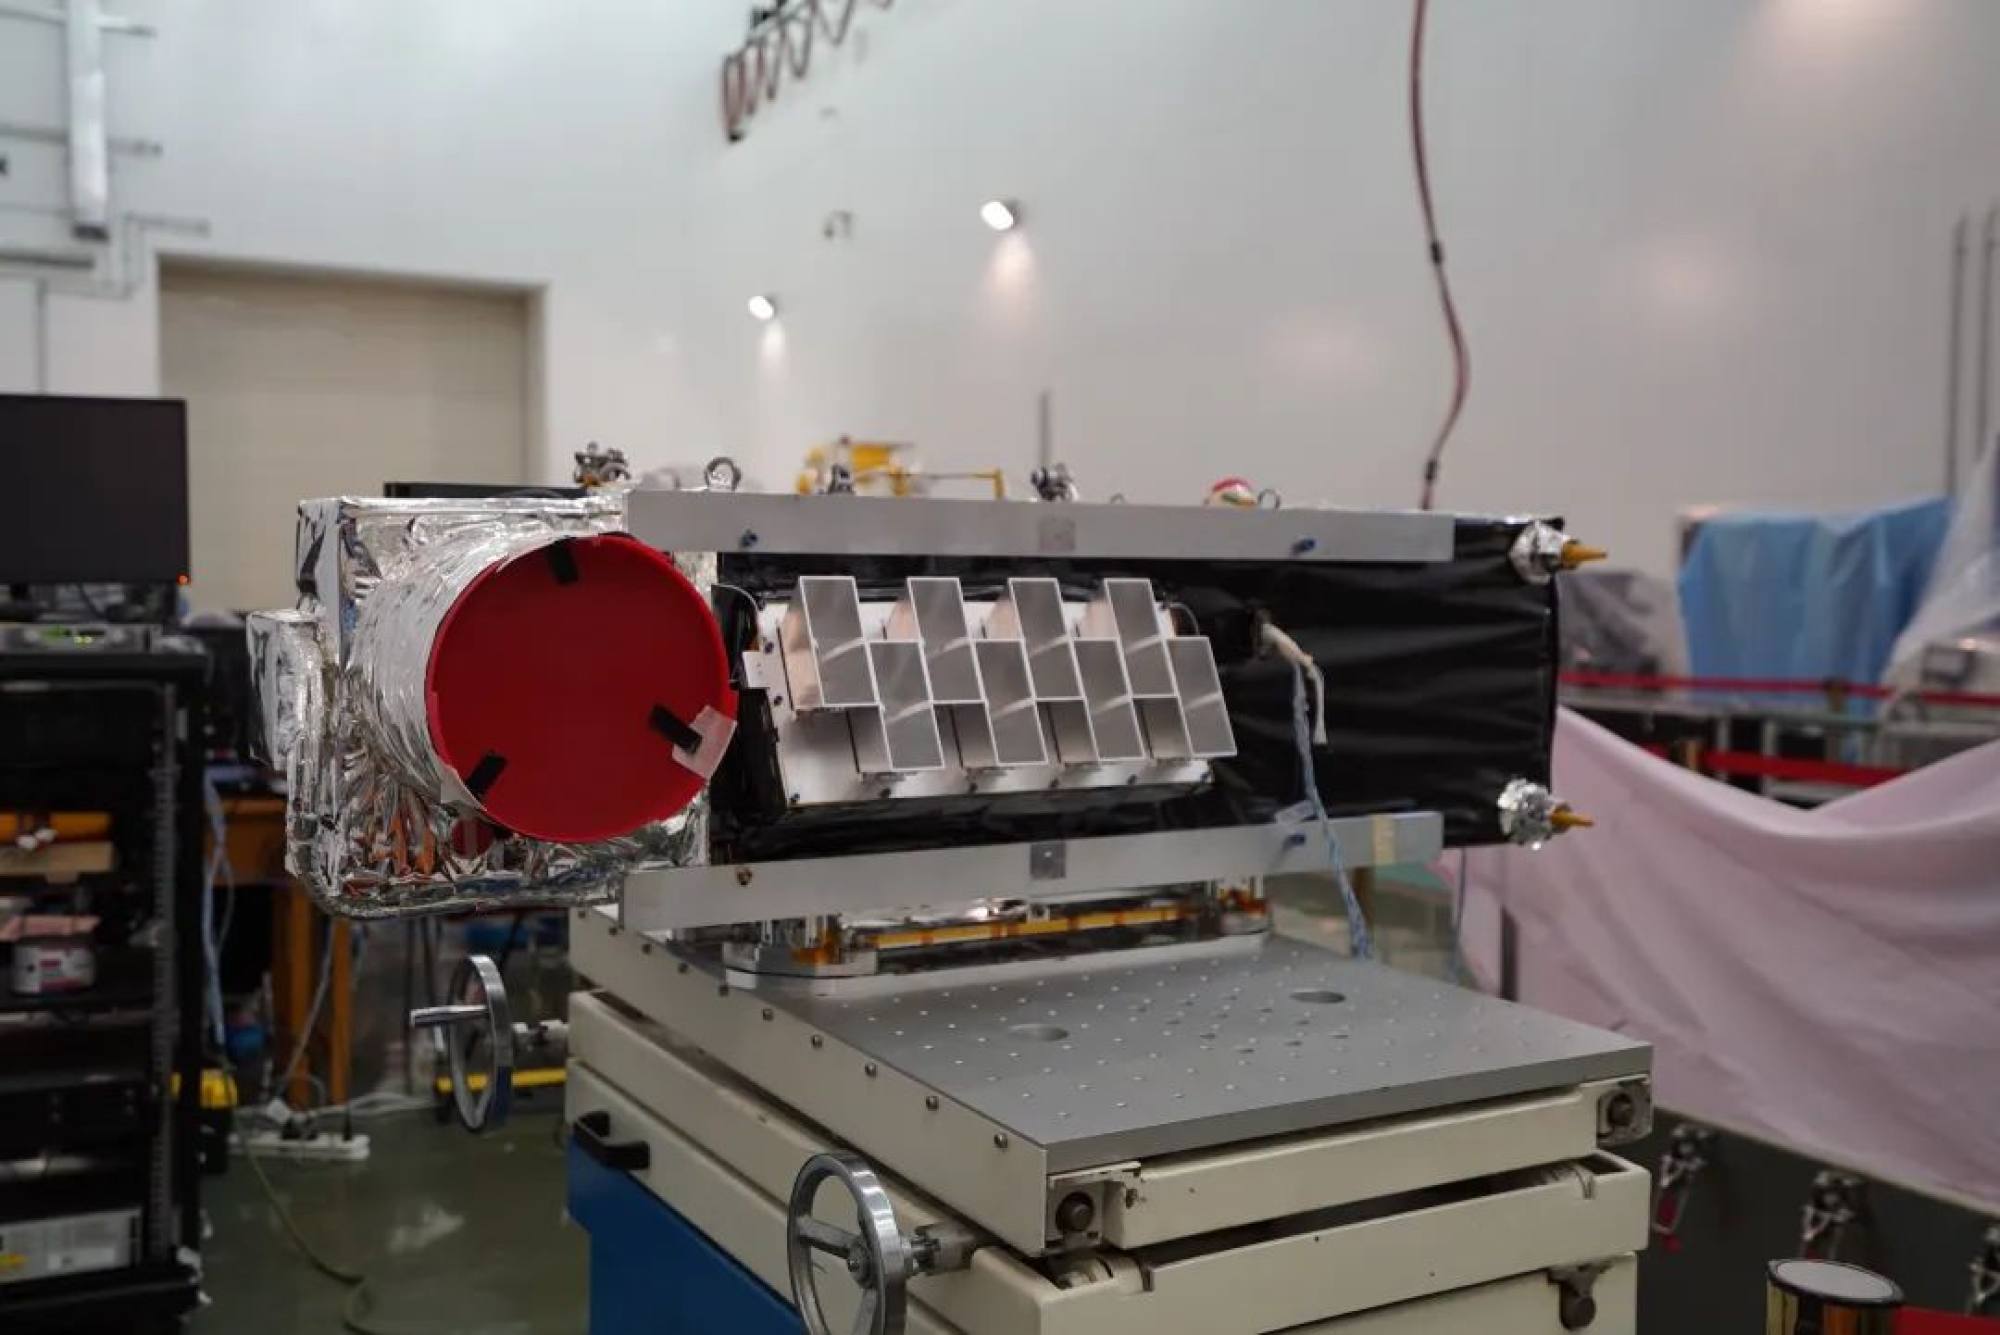 Jinan 1 weighs less than 100kg and is China’s second quantum satellite in orbit. Photo: Handout